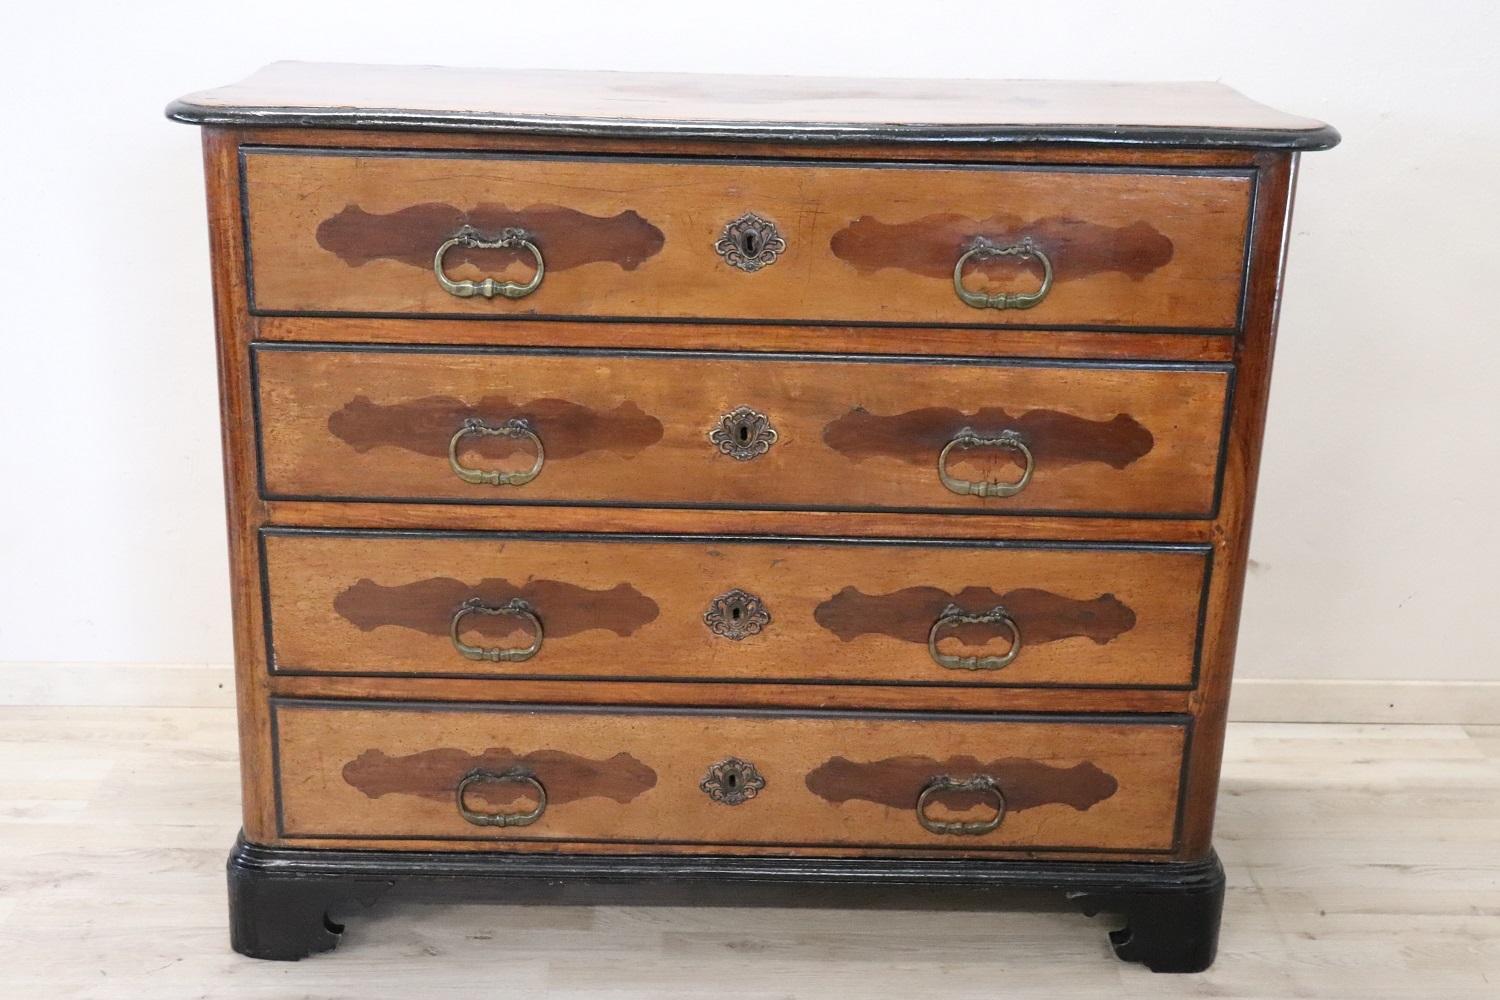 Important and rare antique Italian of the period Louis XIV chest of drawers, 1680. On the front four large and useful drawers. Characterized by front of the drawers with rustic decorations inlaid in solid walnut wood. High quality cabinetry whose